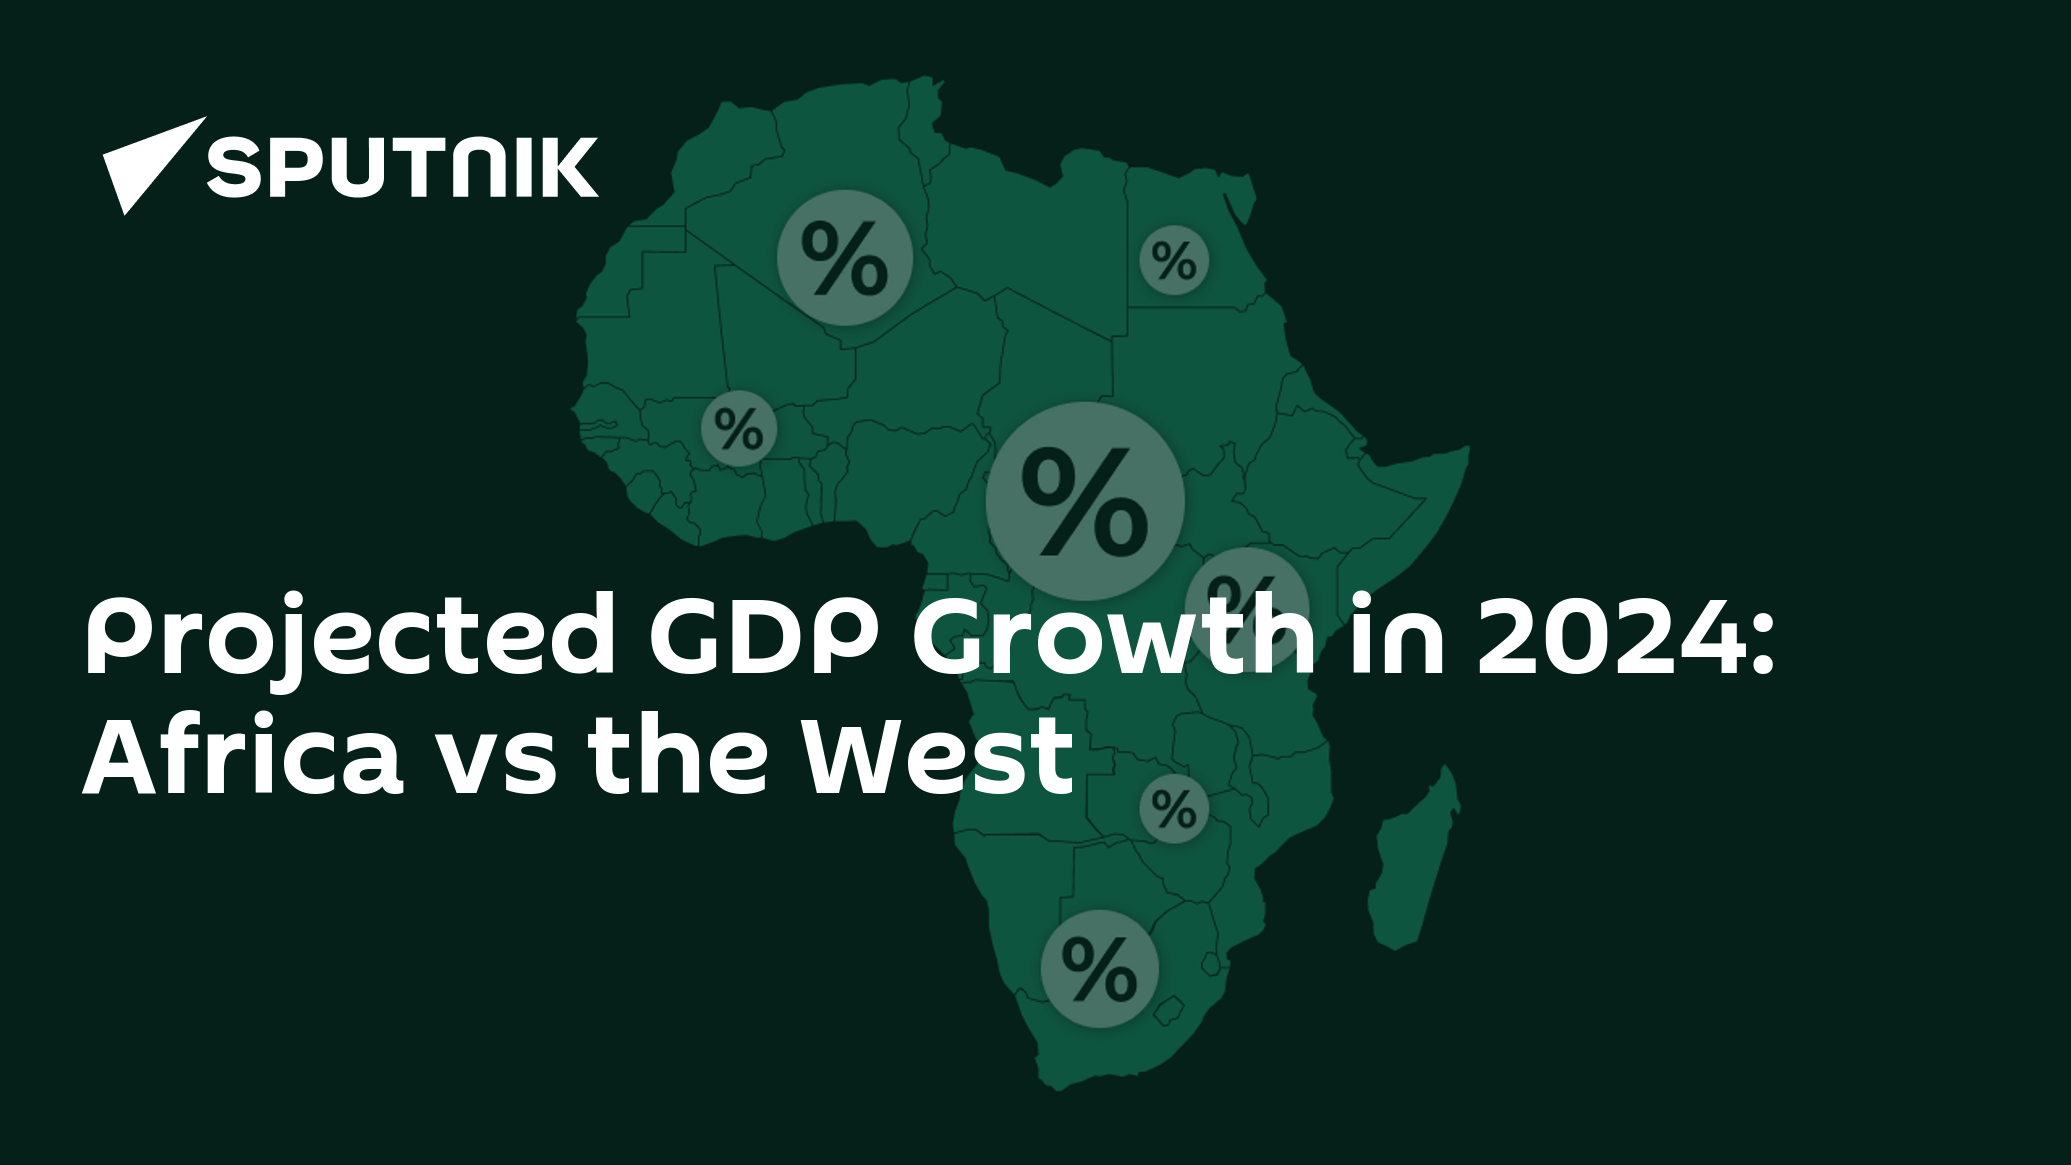 Projected GDP Growth in 2024 Africa vs the West